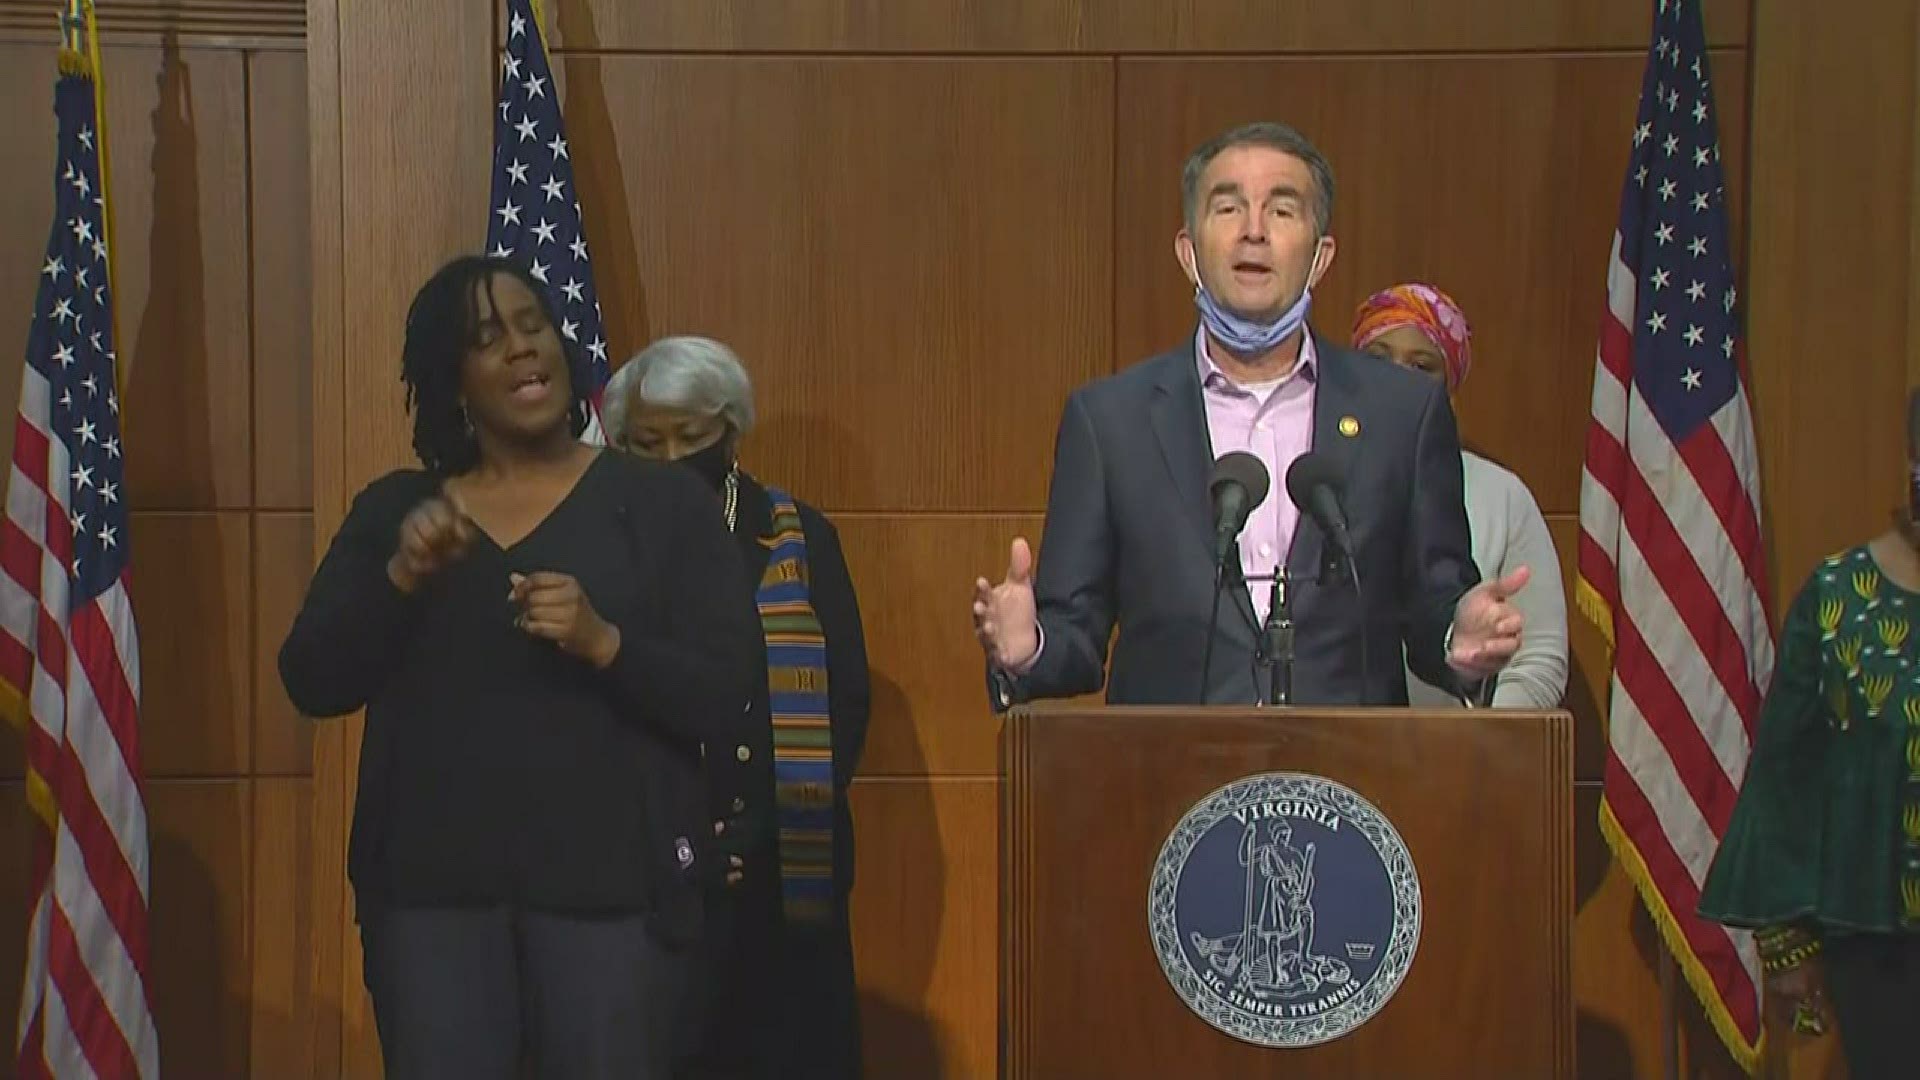 During a coronavirus briefing on Tuesday, Virginia Gov. Ralph Northam announced he is looking to make Juneteenth a state holiday.